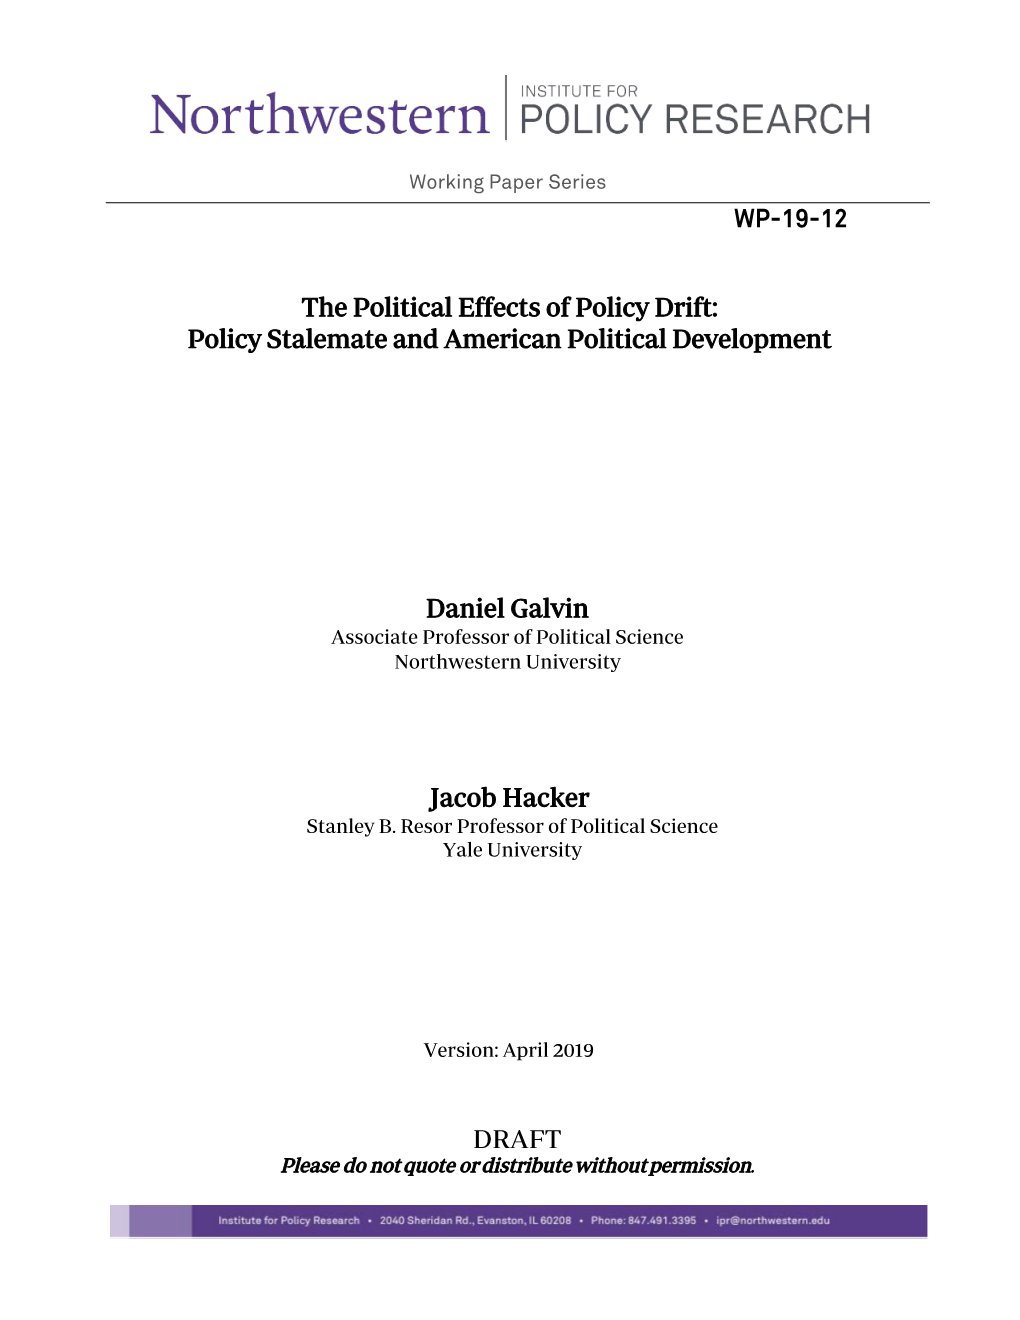 WP-19-12 the Political Effects of Policy Drift: Policy Stalemate and American Political Development Daniel Galvin Jacob Hacker D